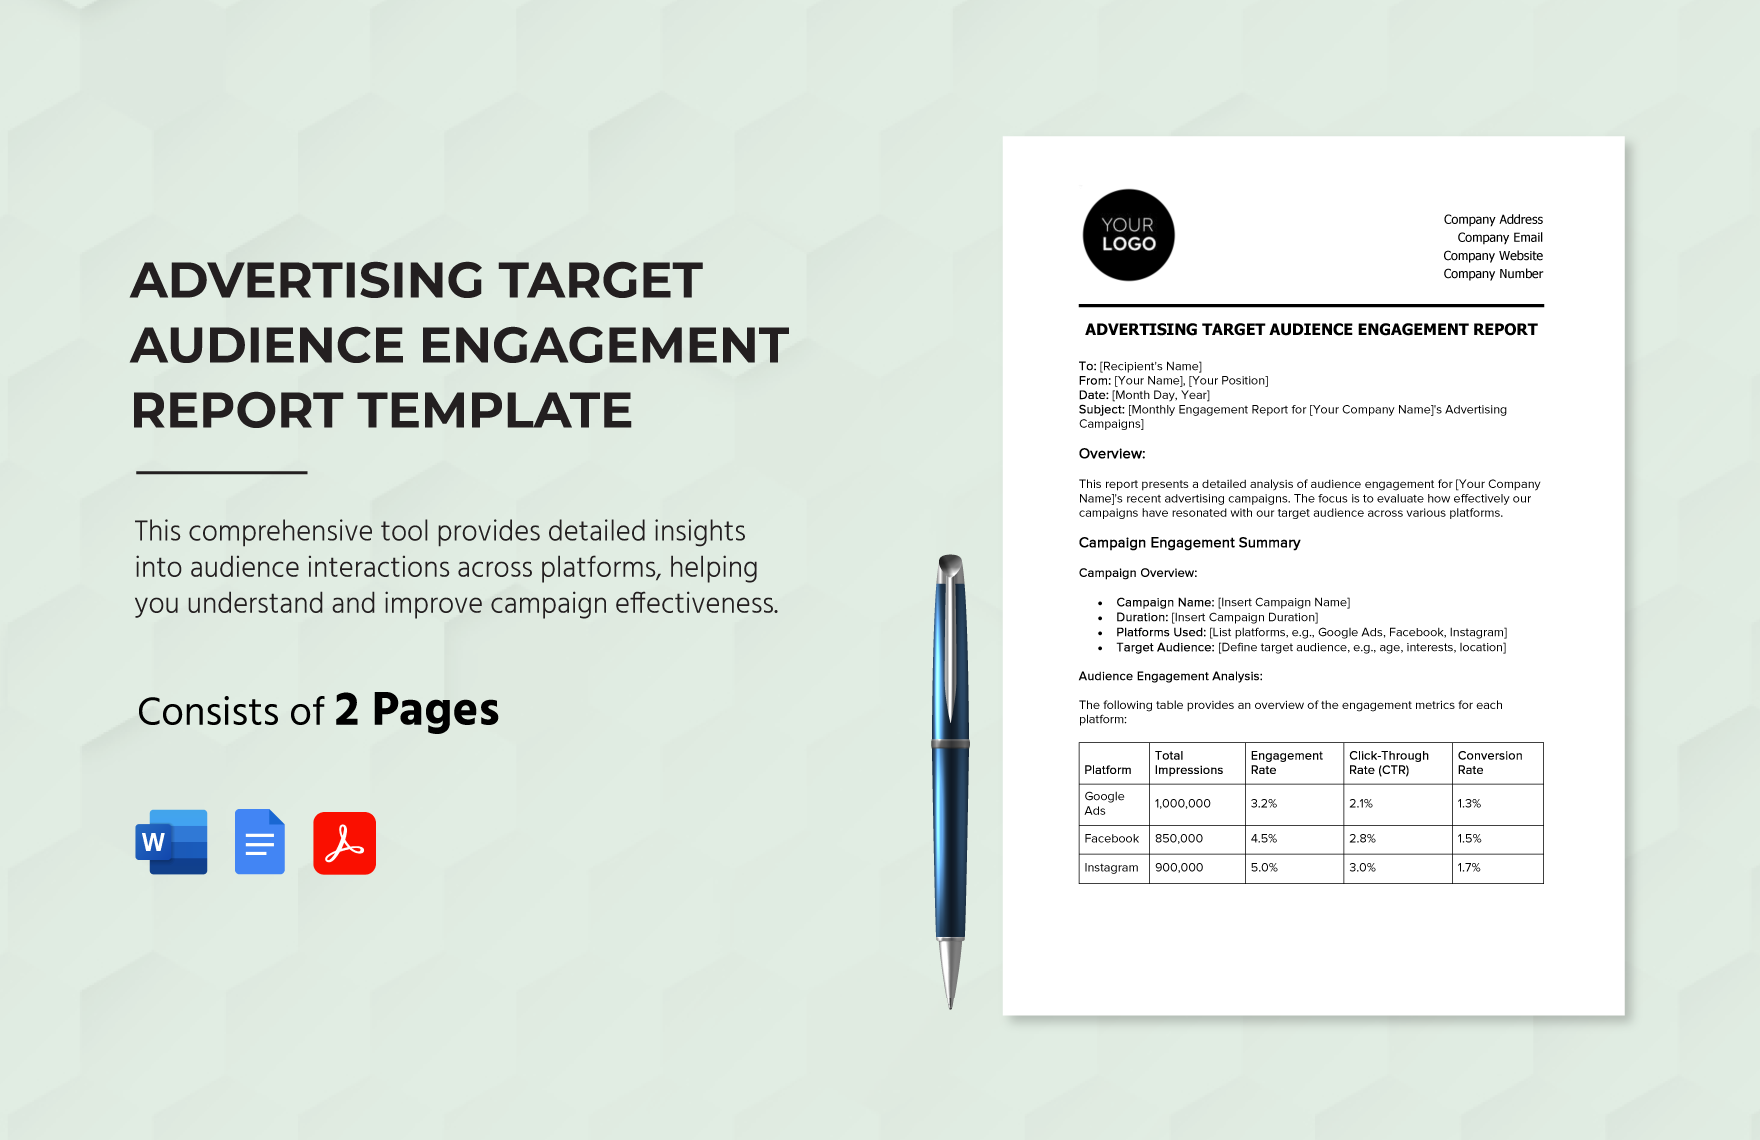 Advertising Target Audience Engagement Report Template in Word, Google Docs, PDF